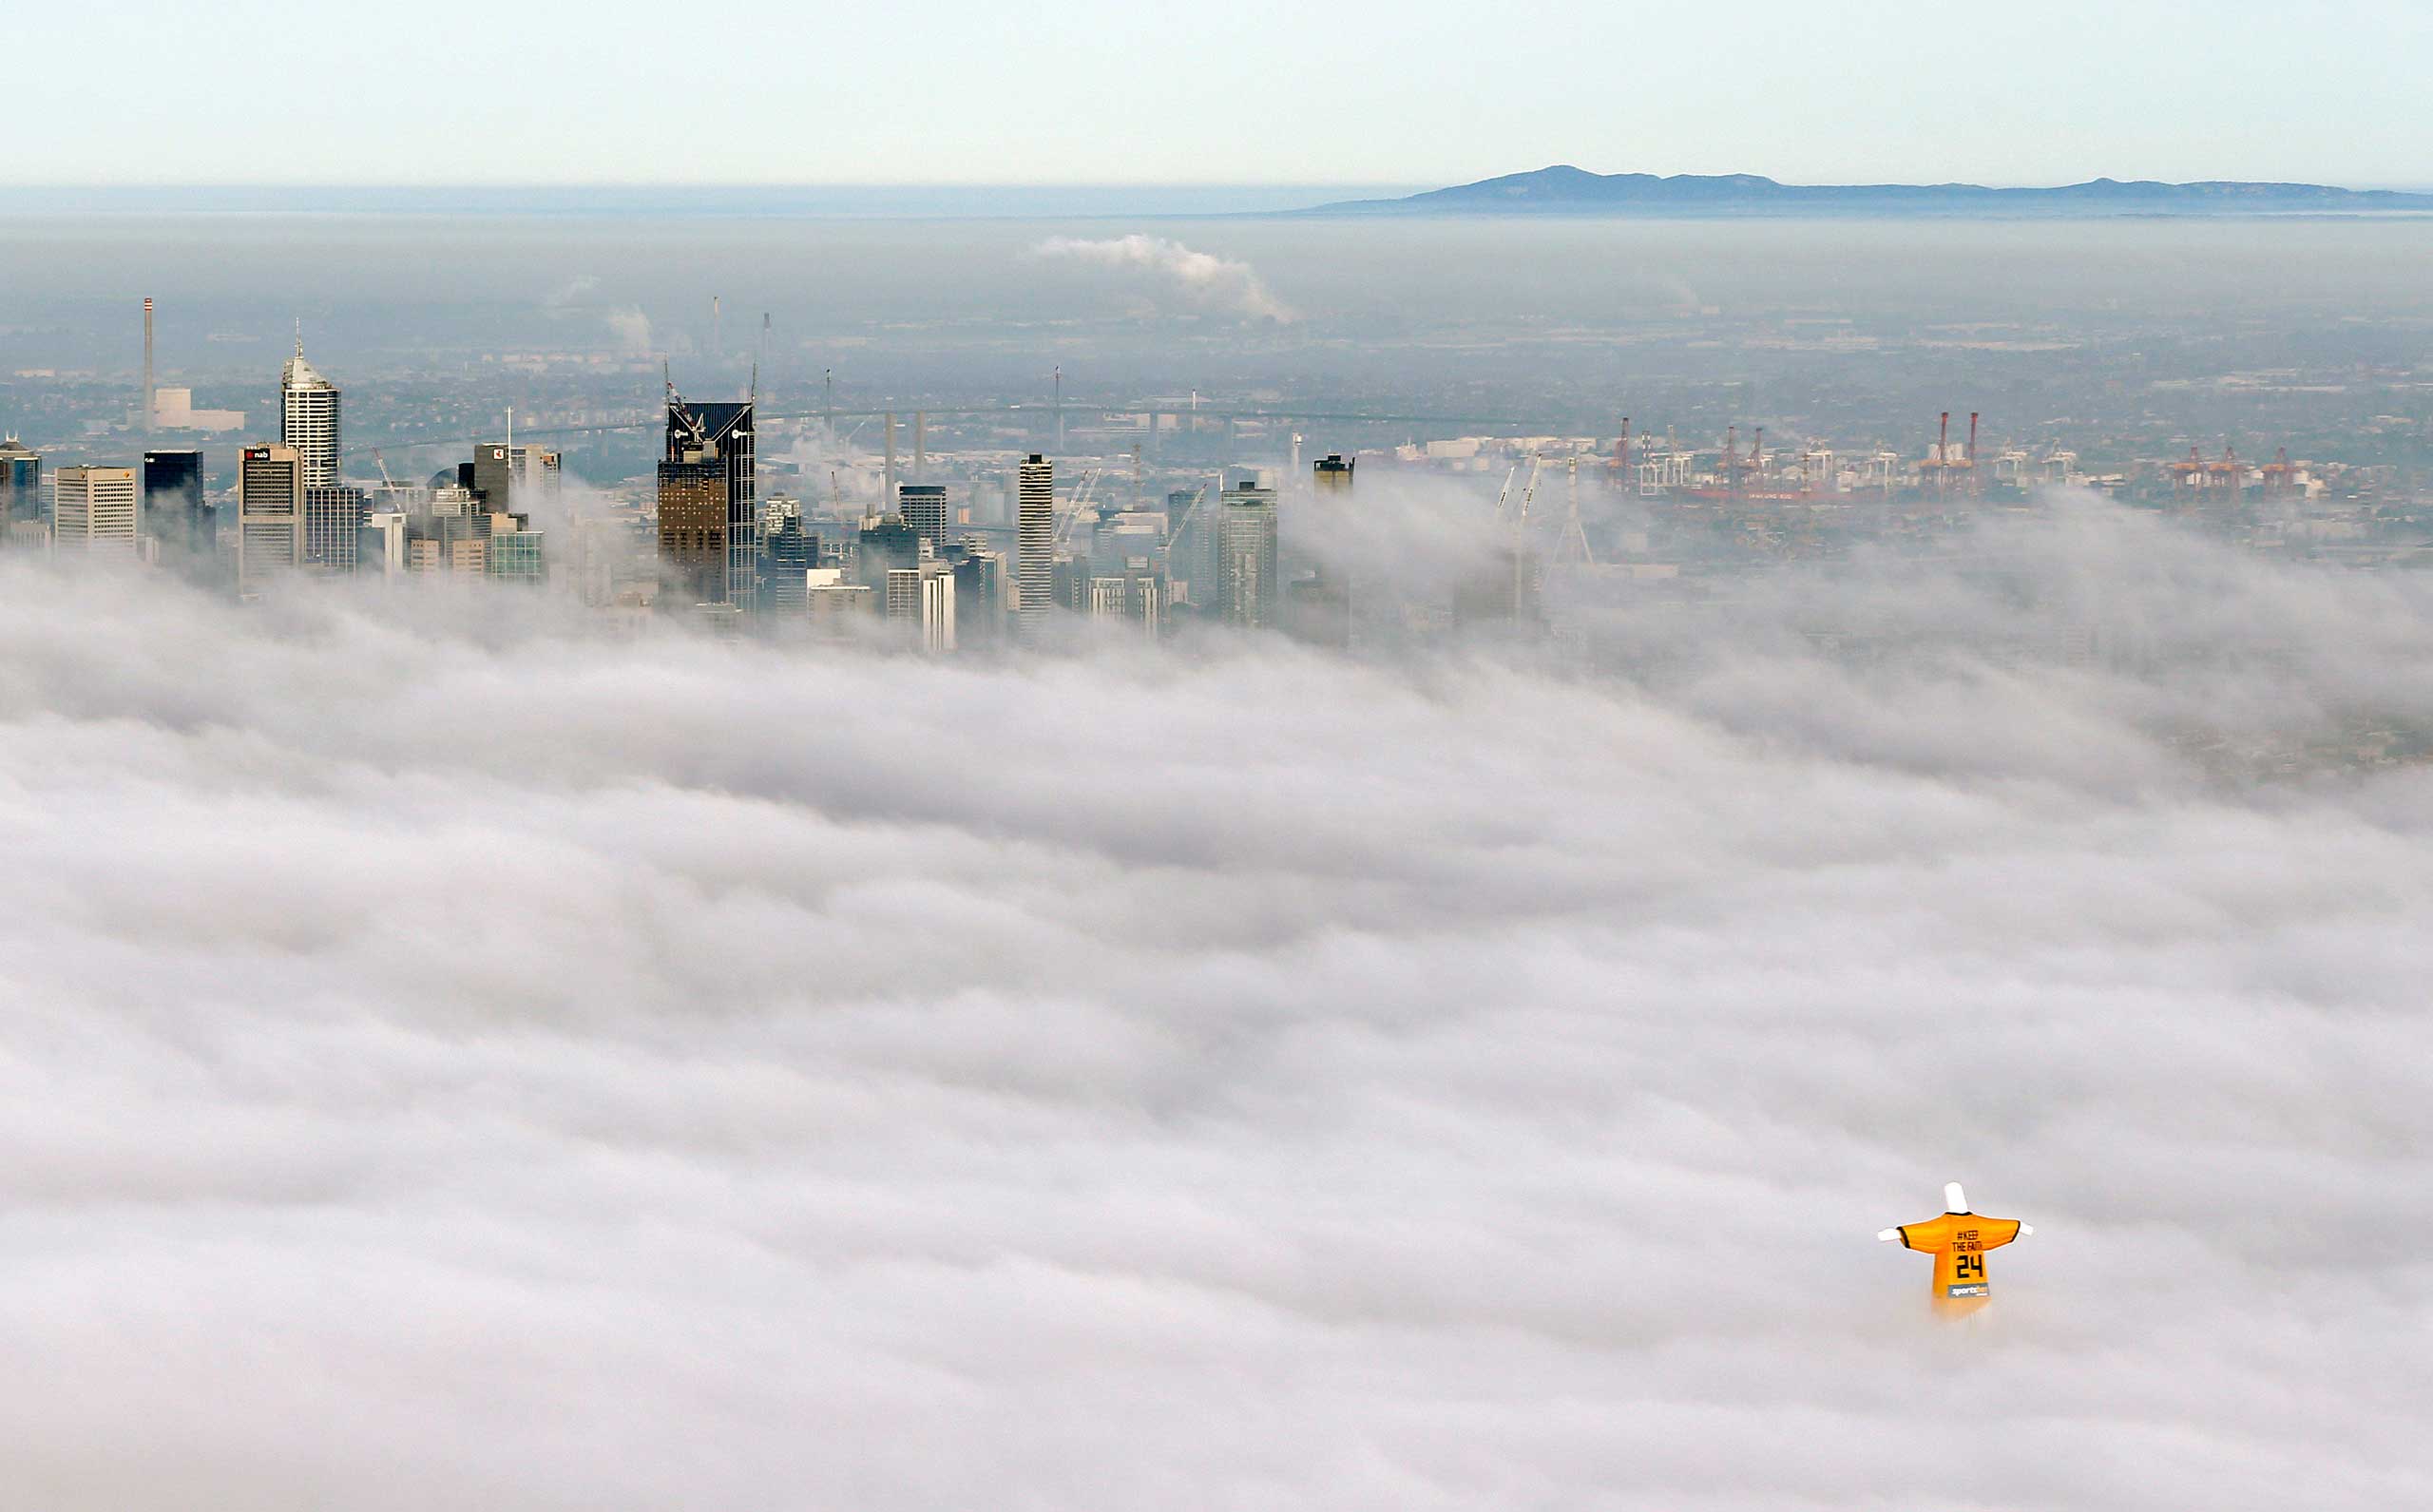 A hot air balloon in the likeness of Brazil's Christ the Redeemer statue wearing the colors of Australia's soccer team, floats through clouds over the Melbourne skyline, June 10, 2014.